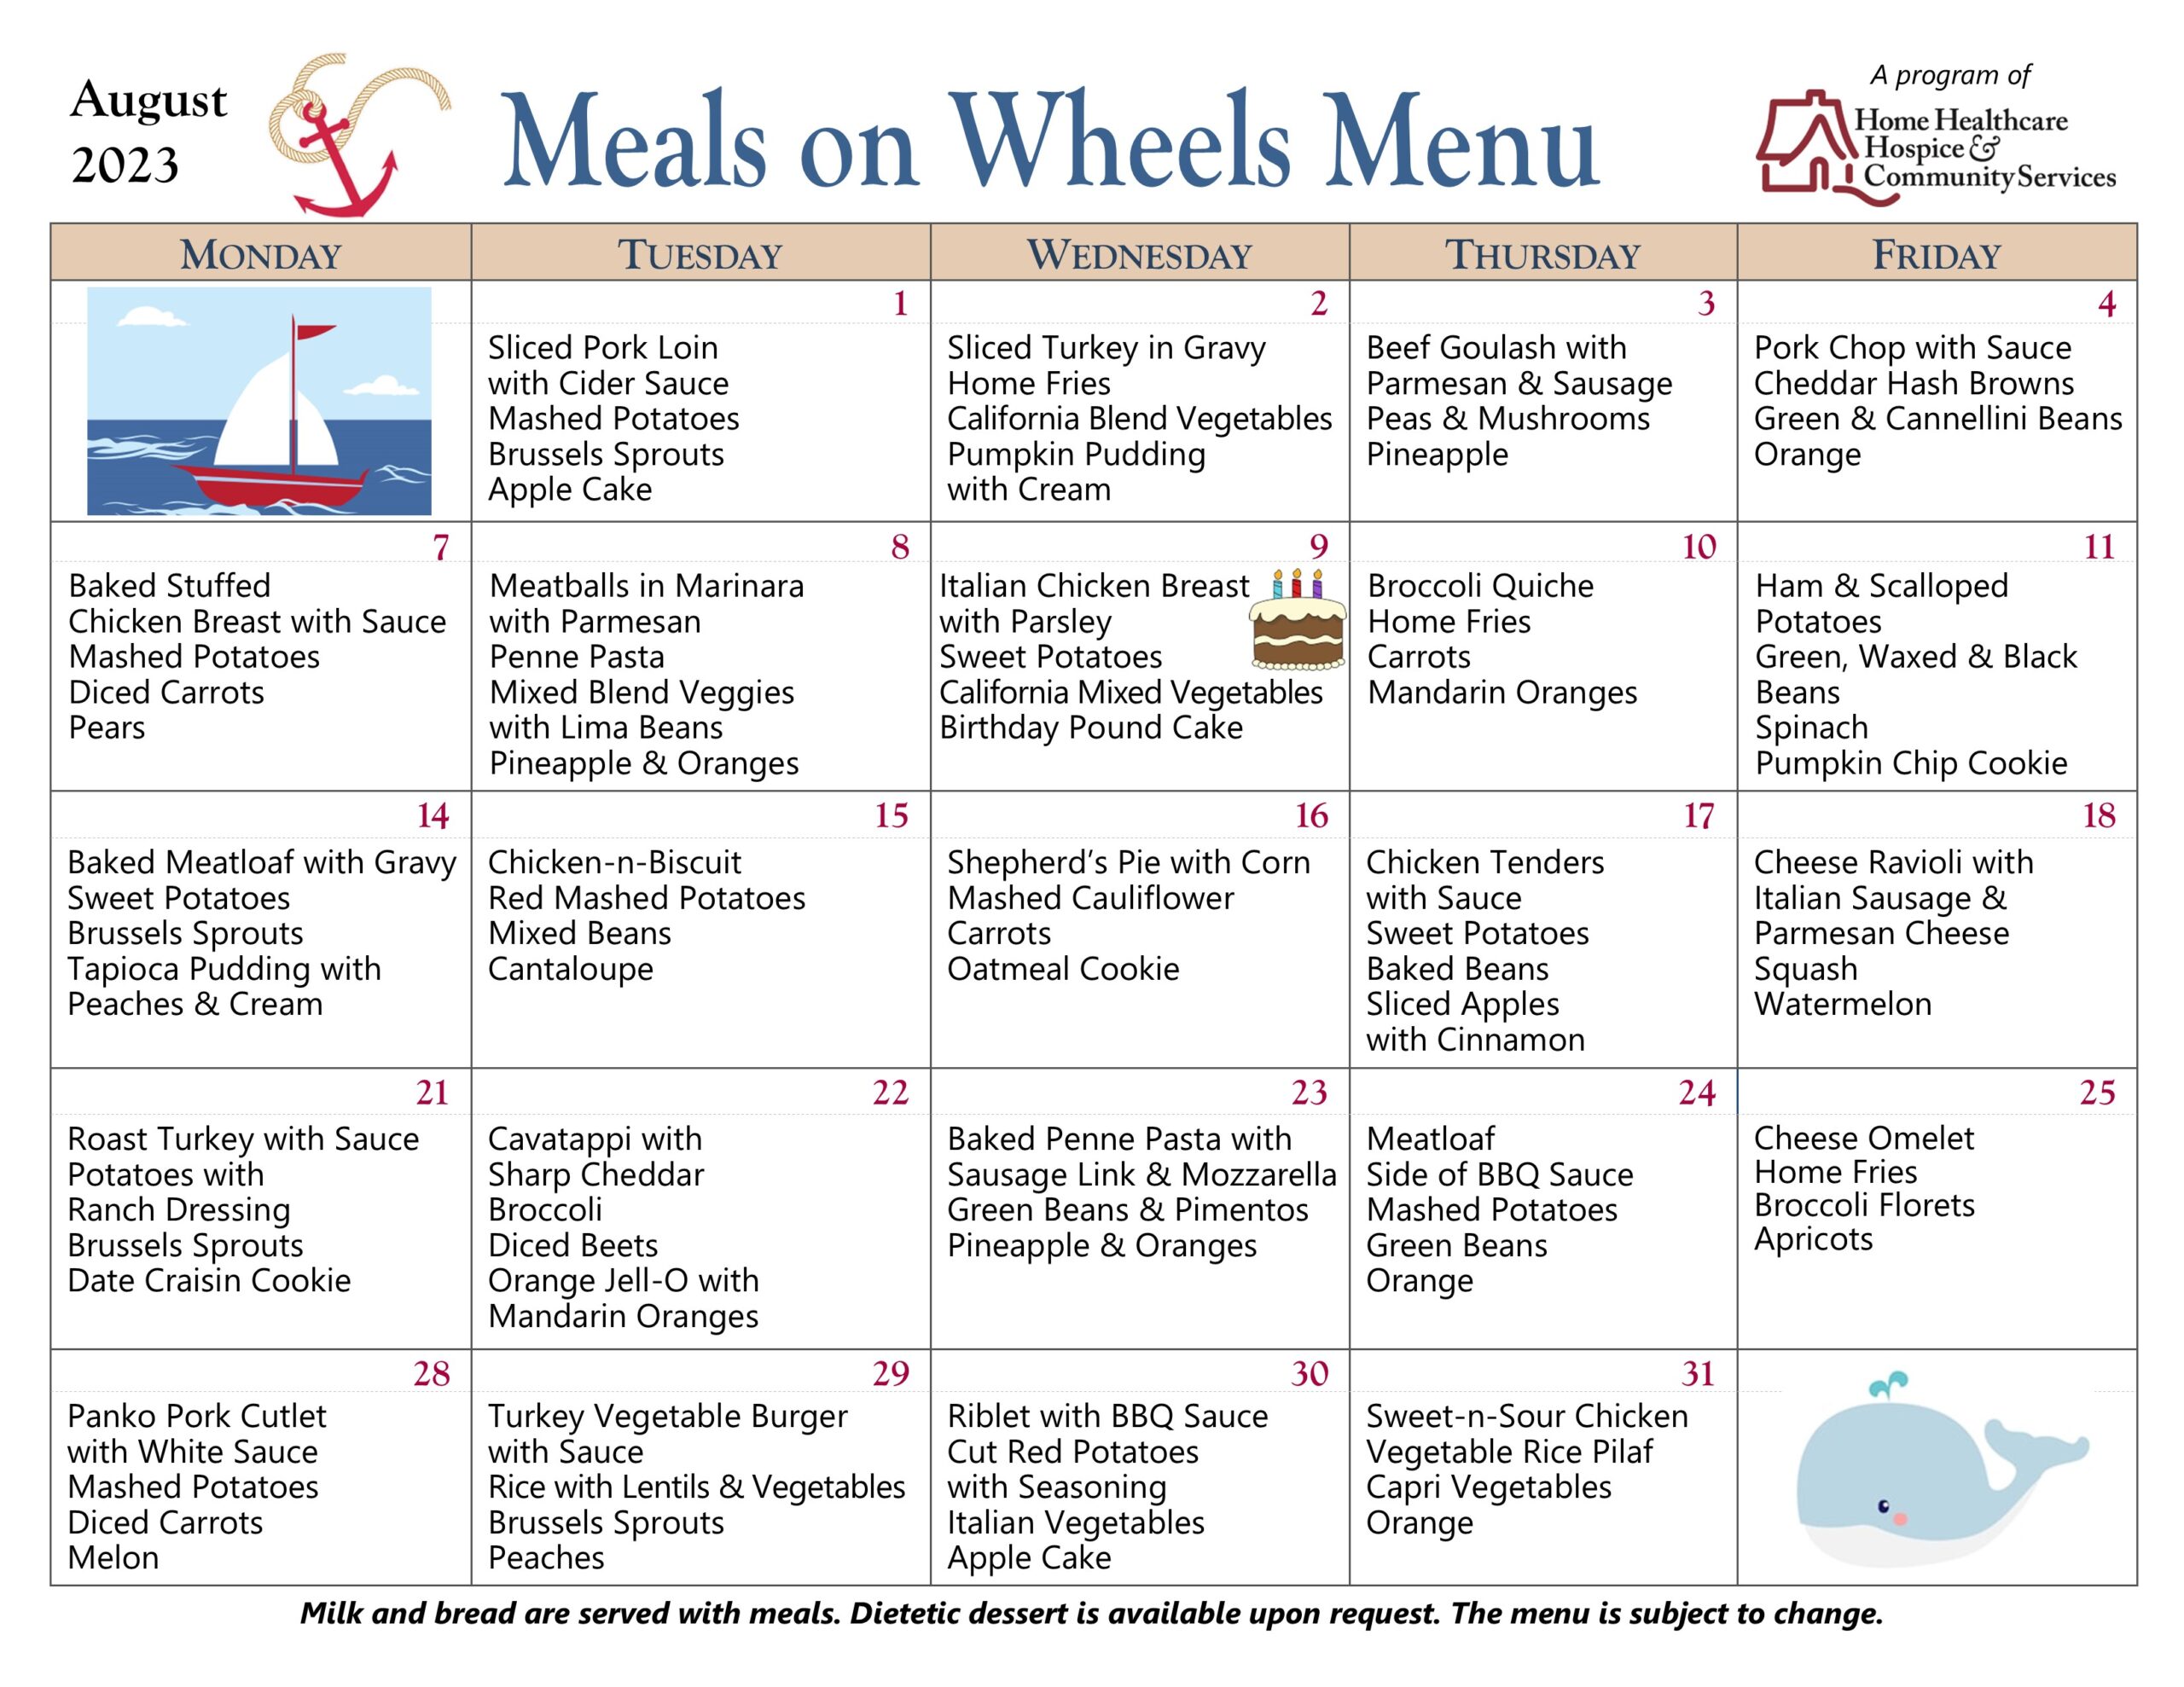 Meals On Wheels Menu for August 2023